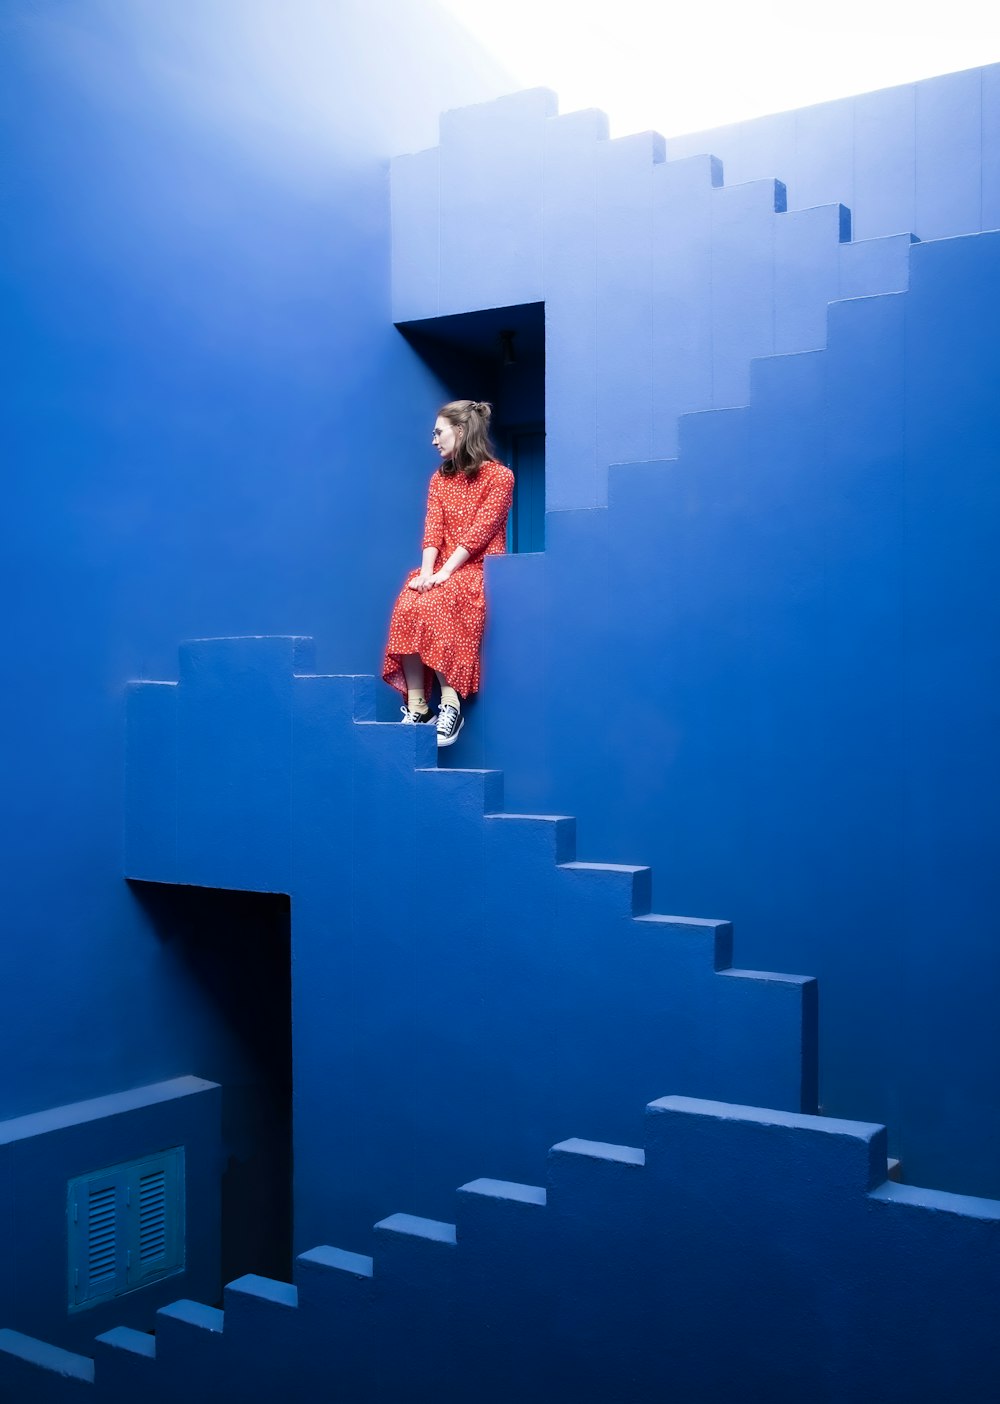 a woman in a red dress is sitting on a blue staircase